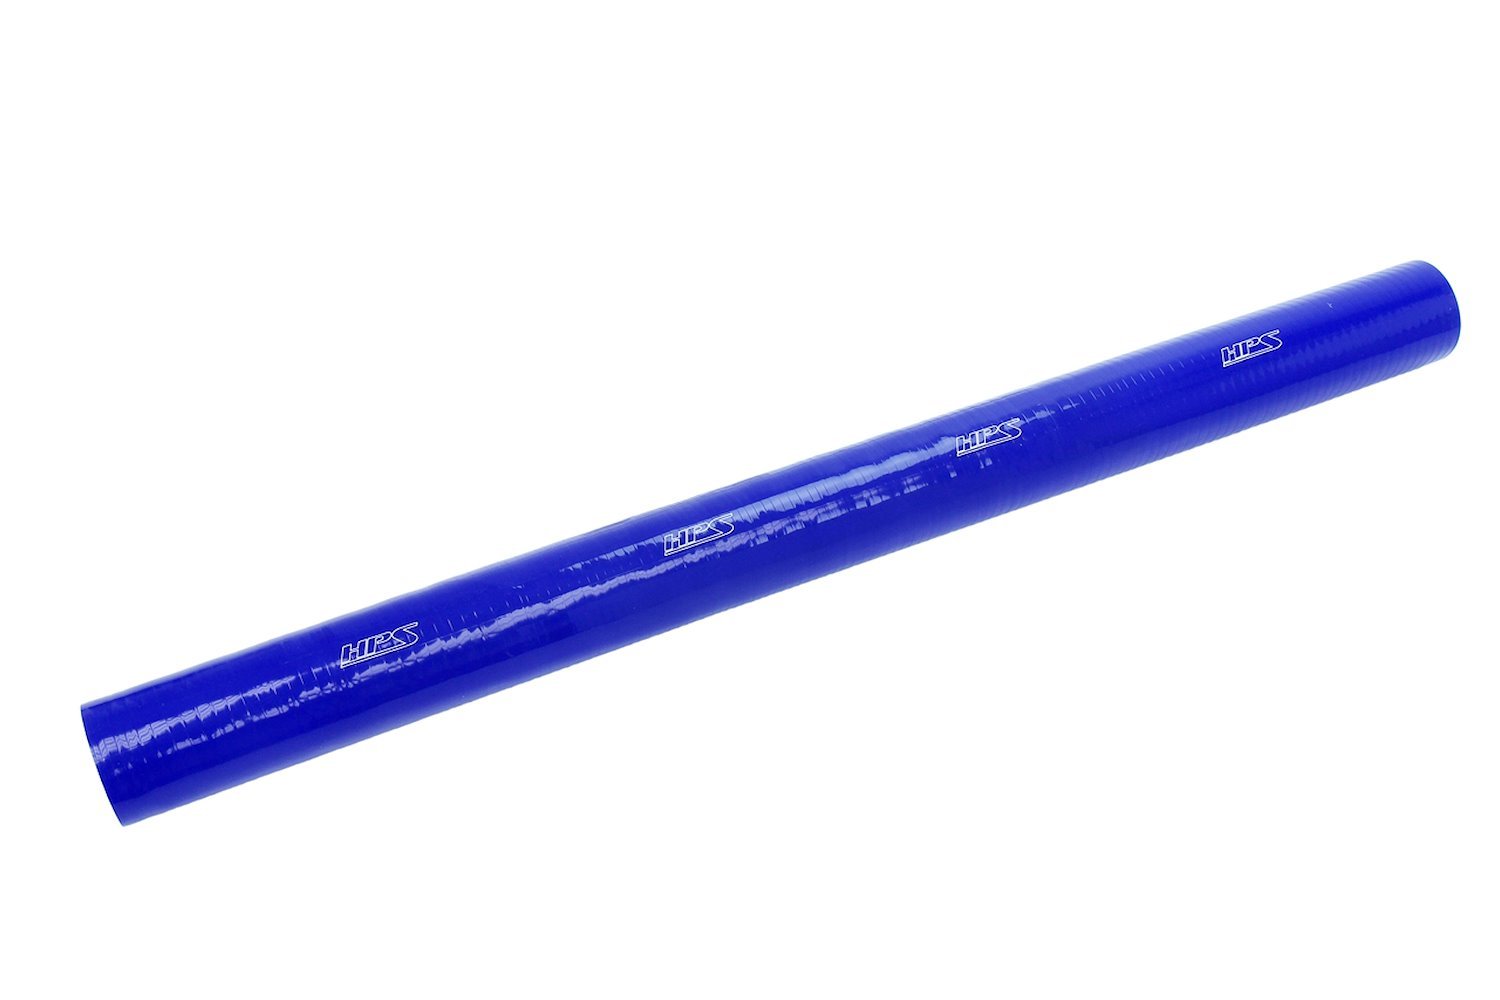 HTST-3F-662-BLUE Silicone Coolant Tube, High-Temp 6-Ply Reinforced, 6-5/8 in. ID, 3 ft. Long, Blue